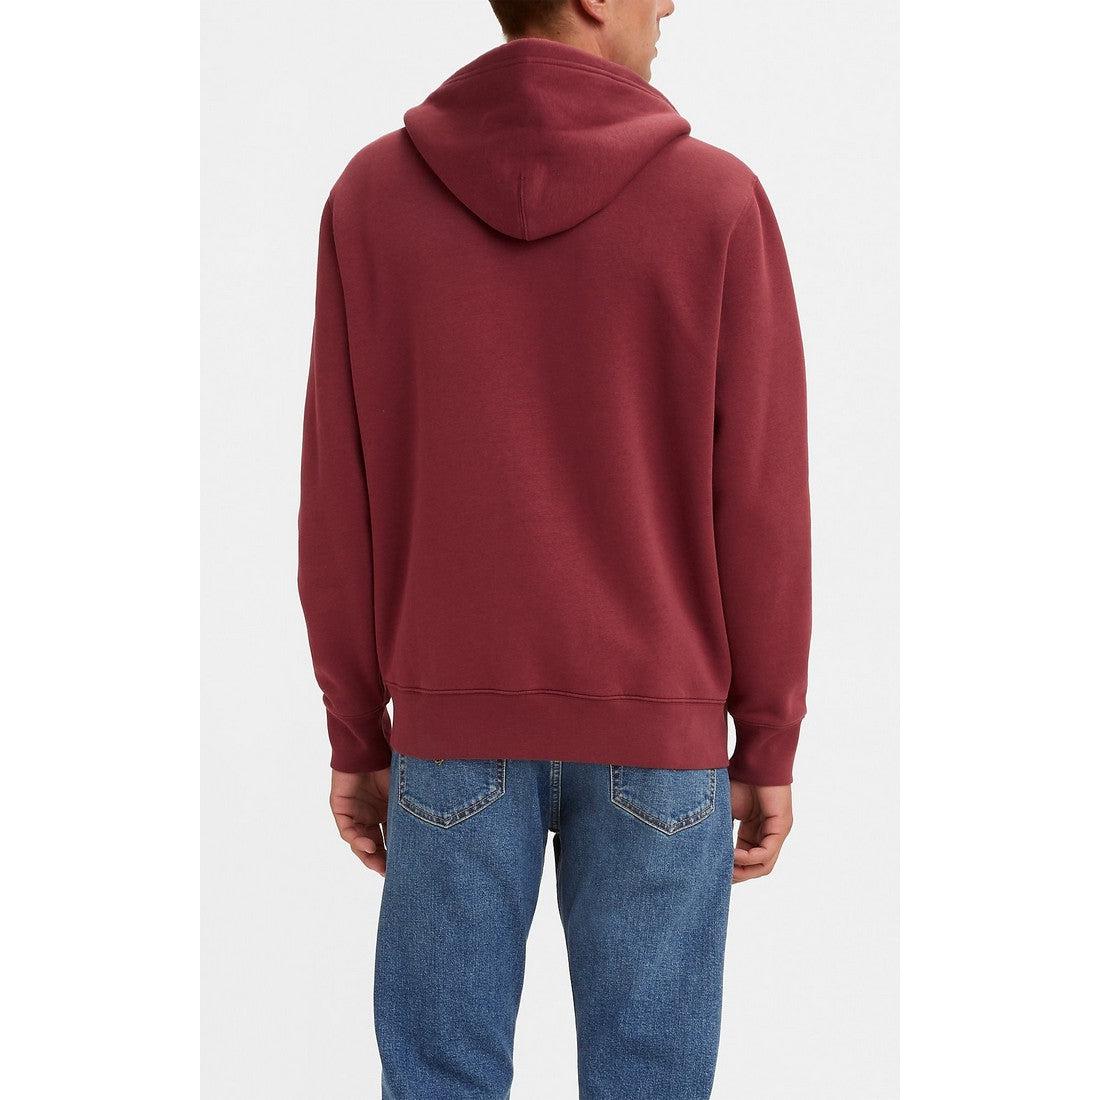 CORE NG ZIP UP-MENS SWEATERS & KNITS-LEVIS-JB Evans Fashions & Footwear